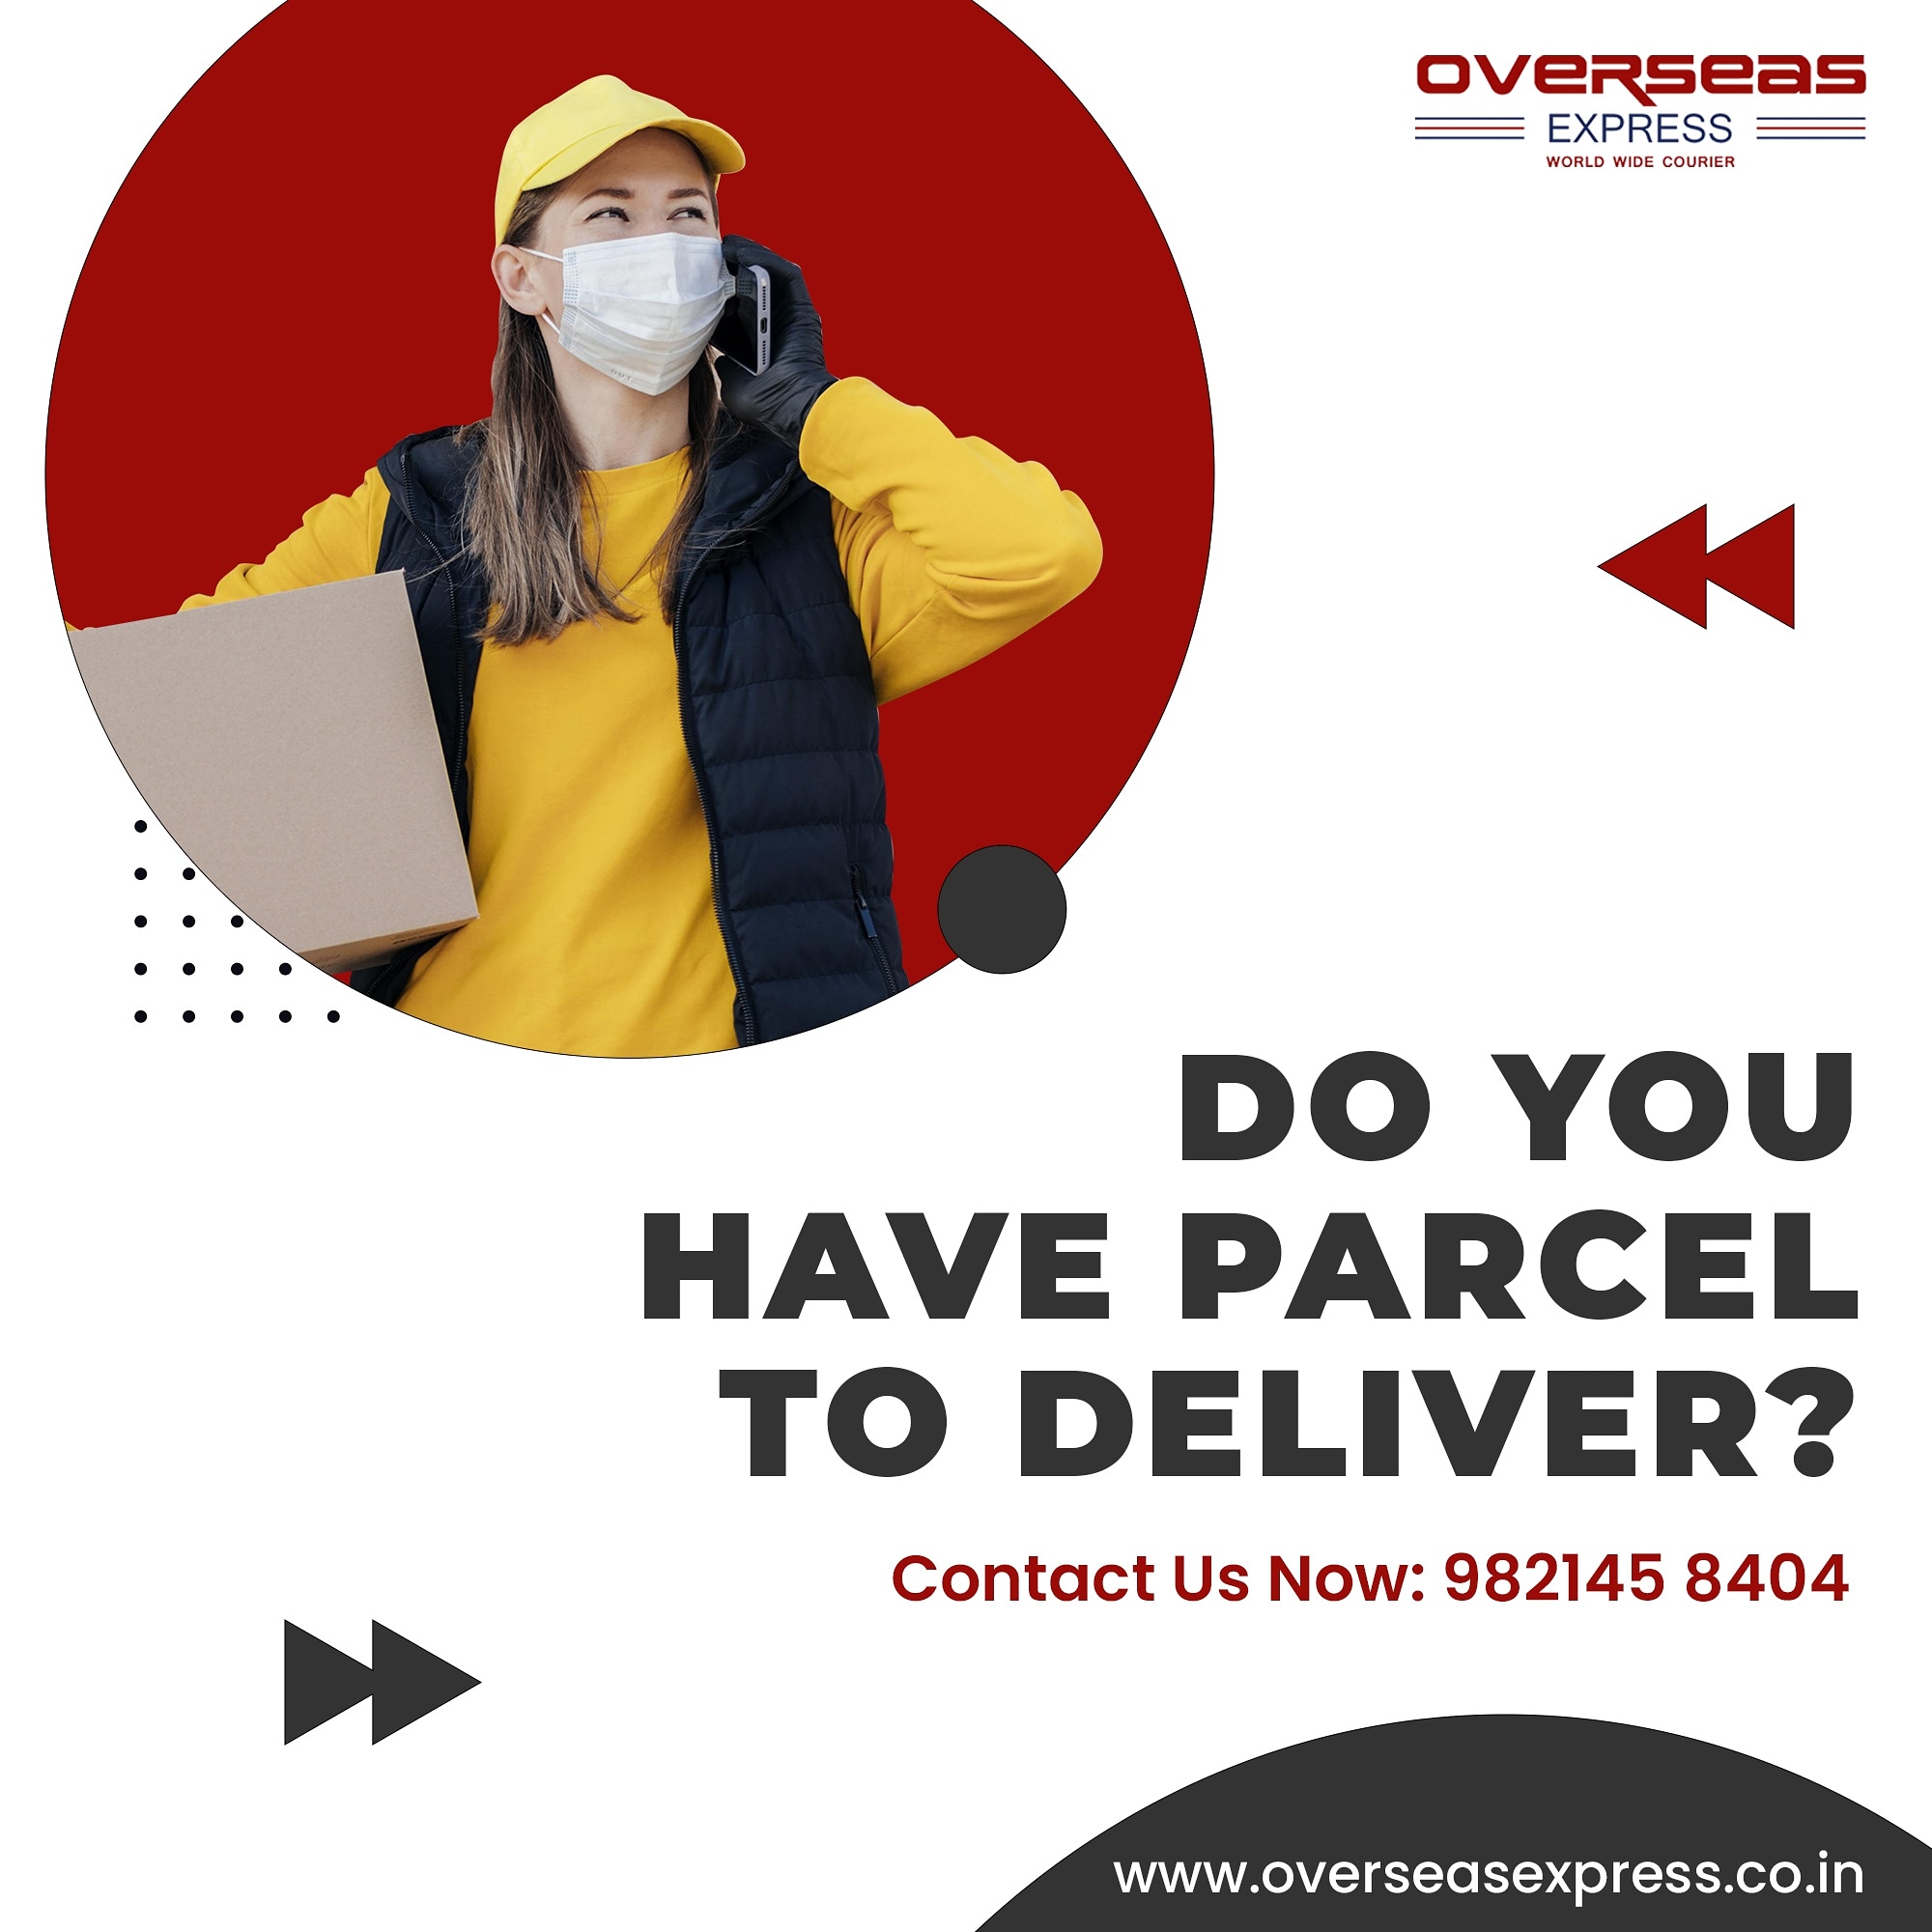 International Courier Service on X: We offer professional Parcel